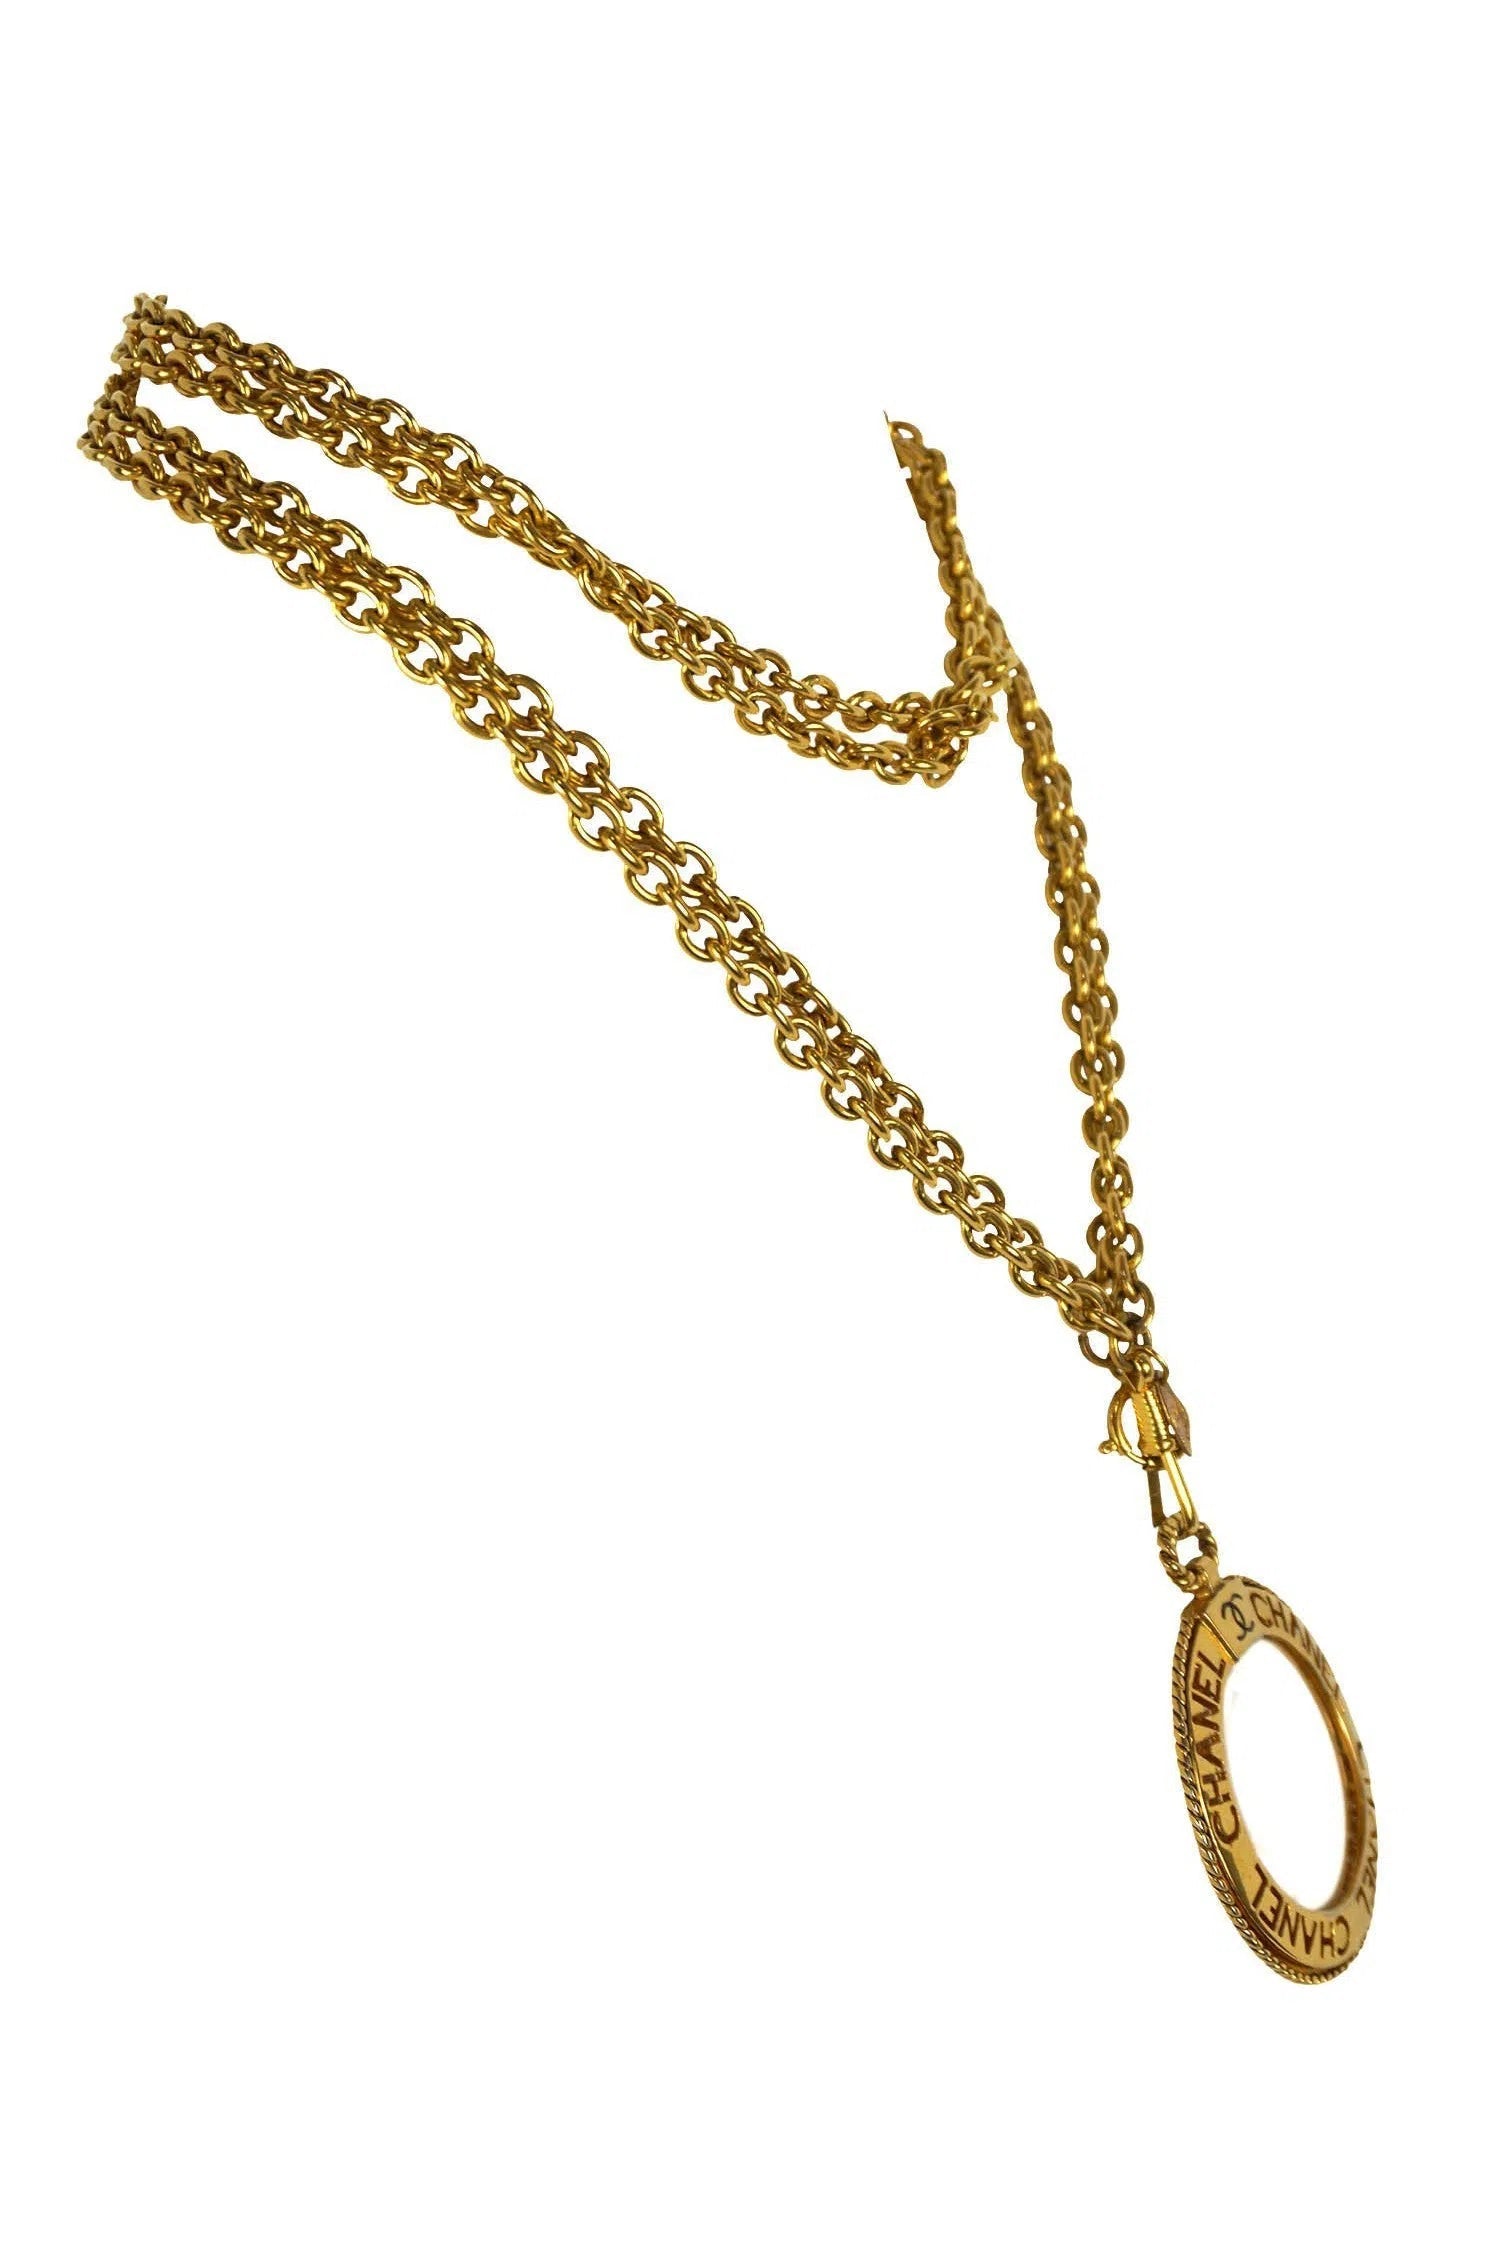 Chanel Vintage 1980's Magnifying Glass Necklace